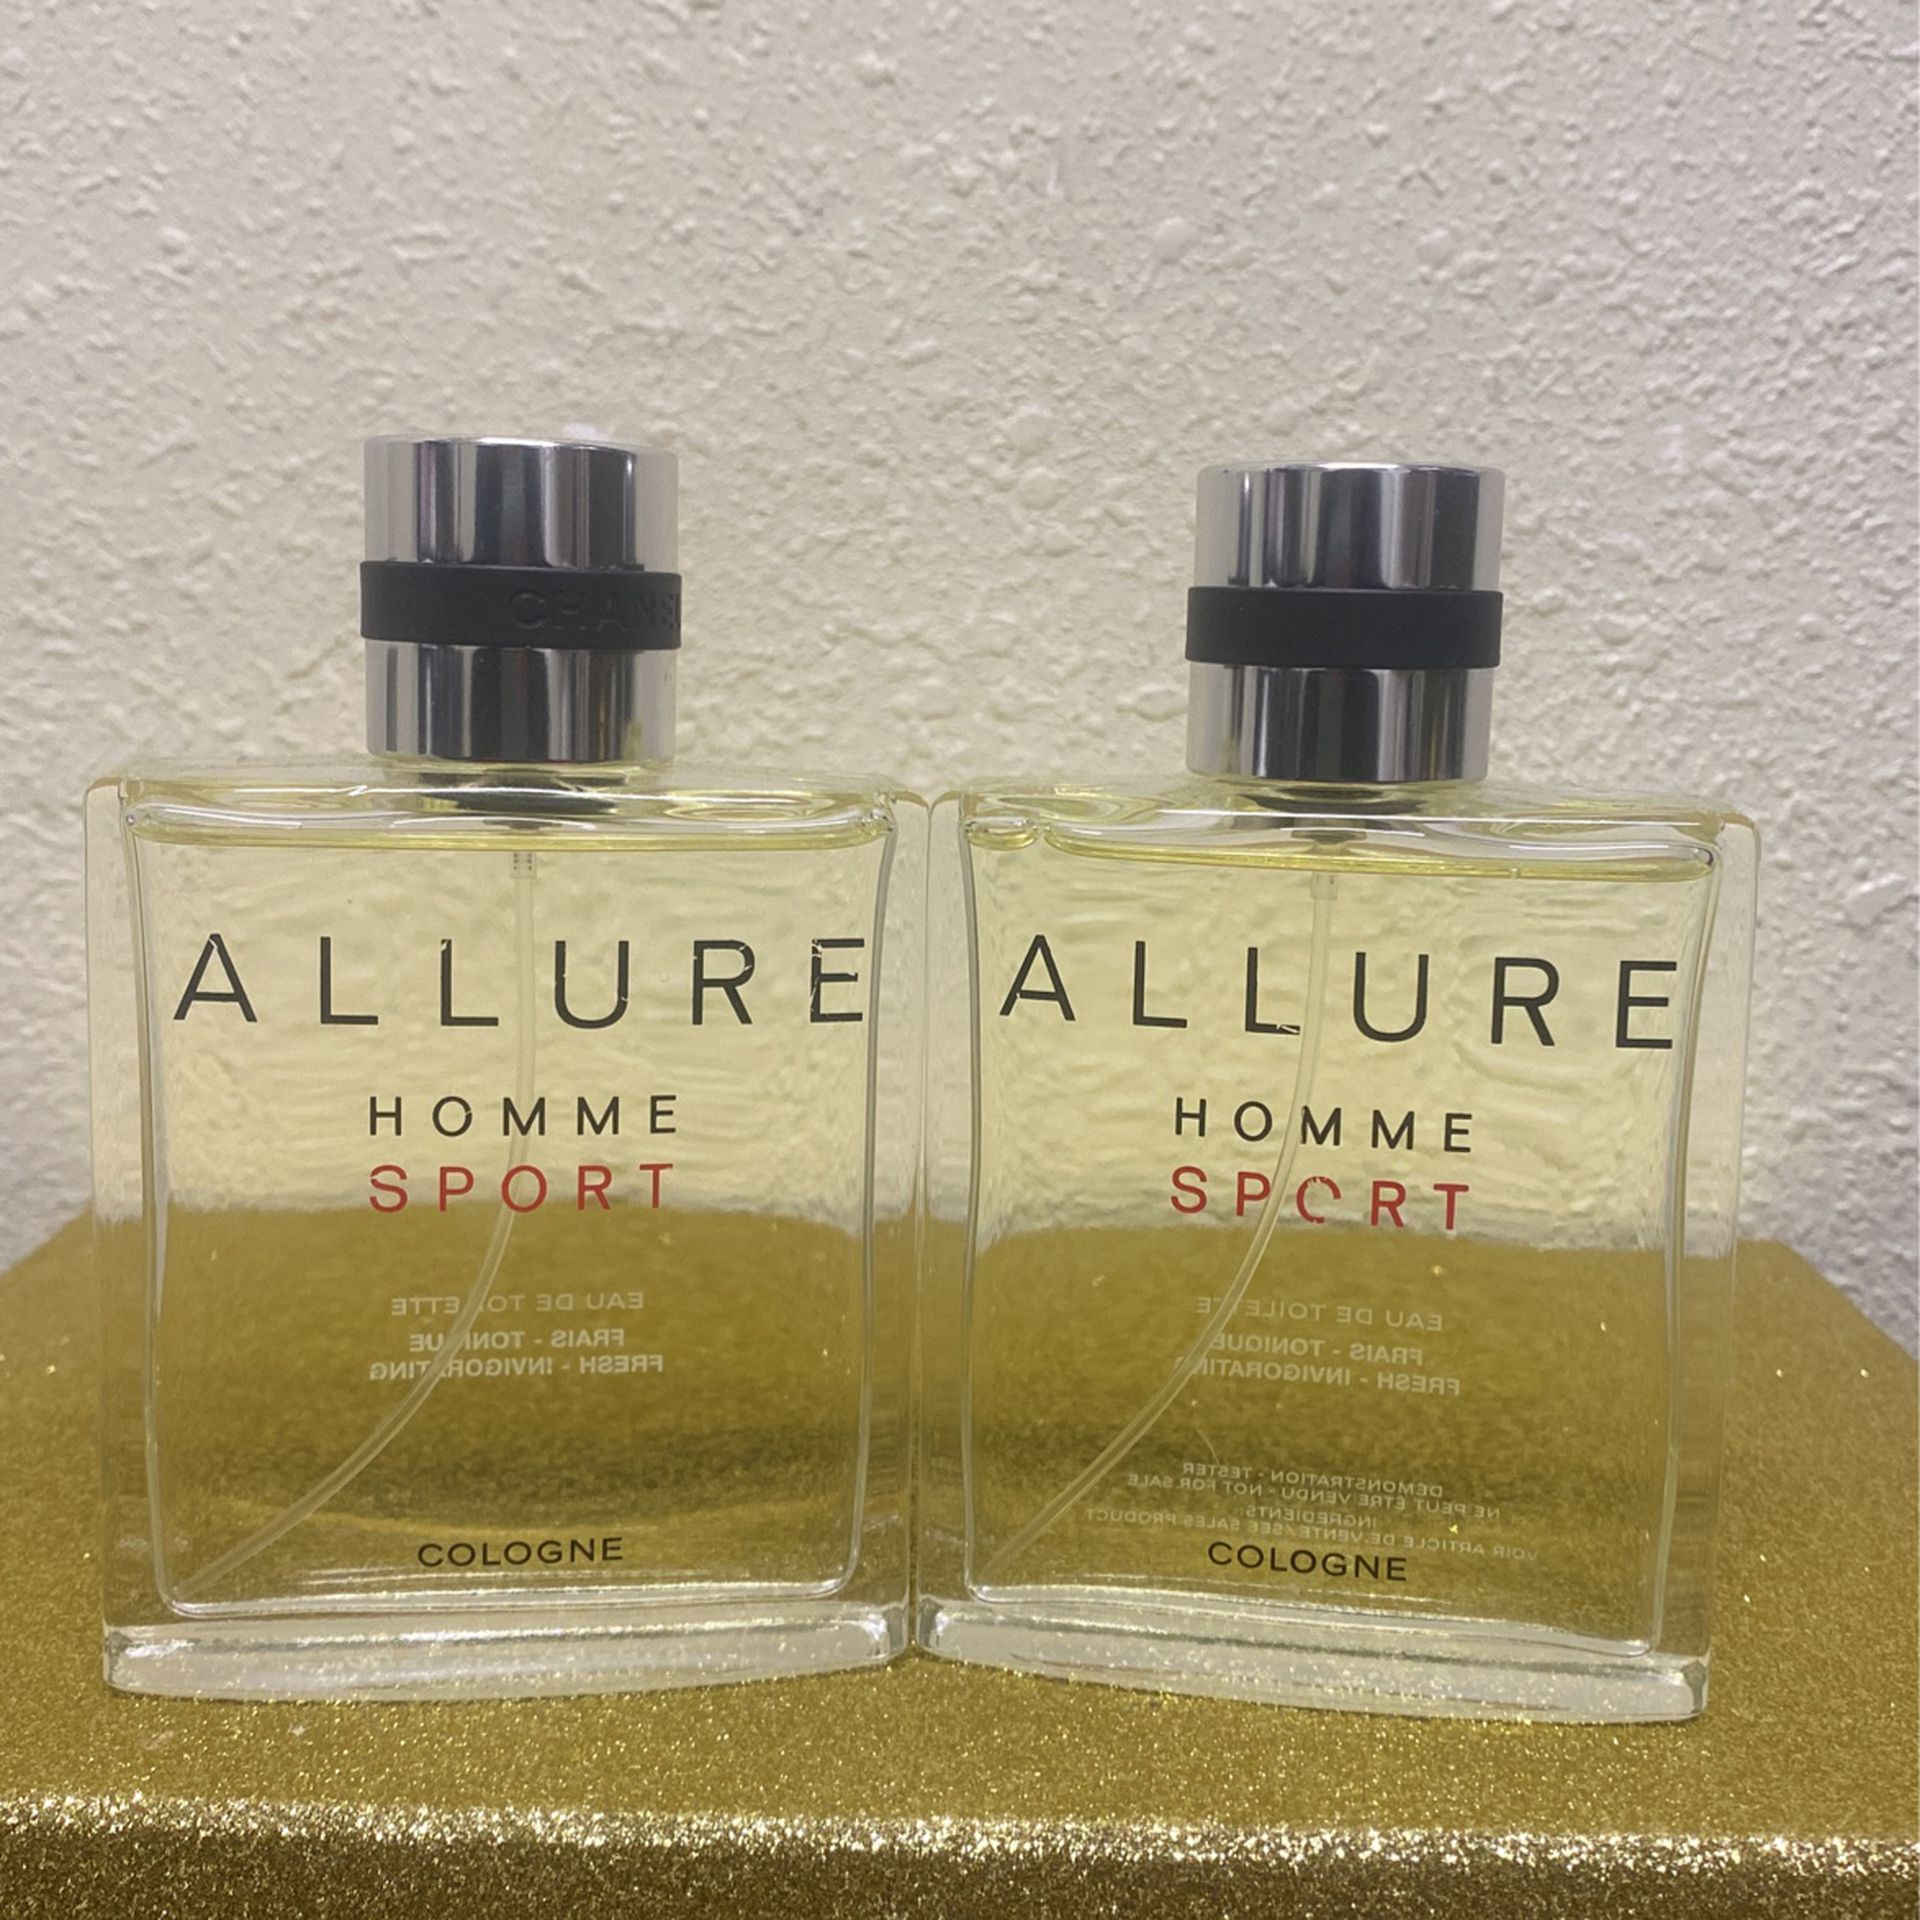 Chanel Allure Homme Sport Cologne Sport Review 